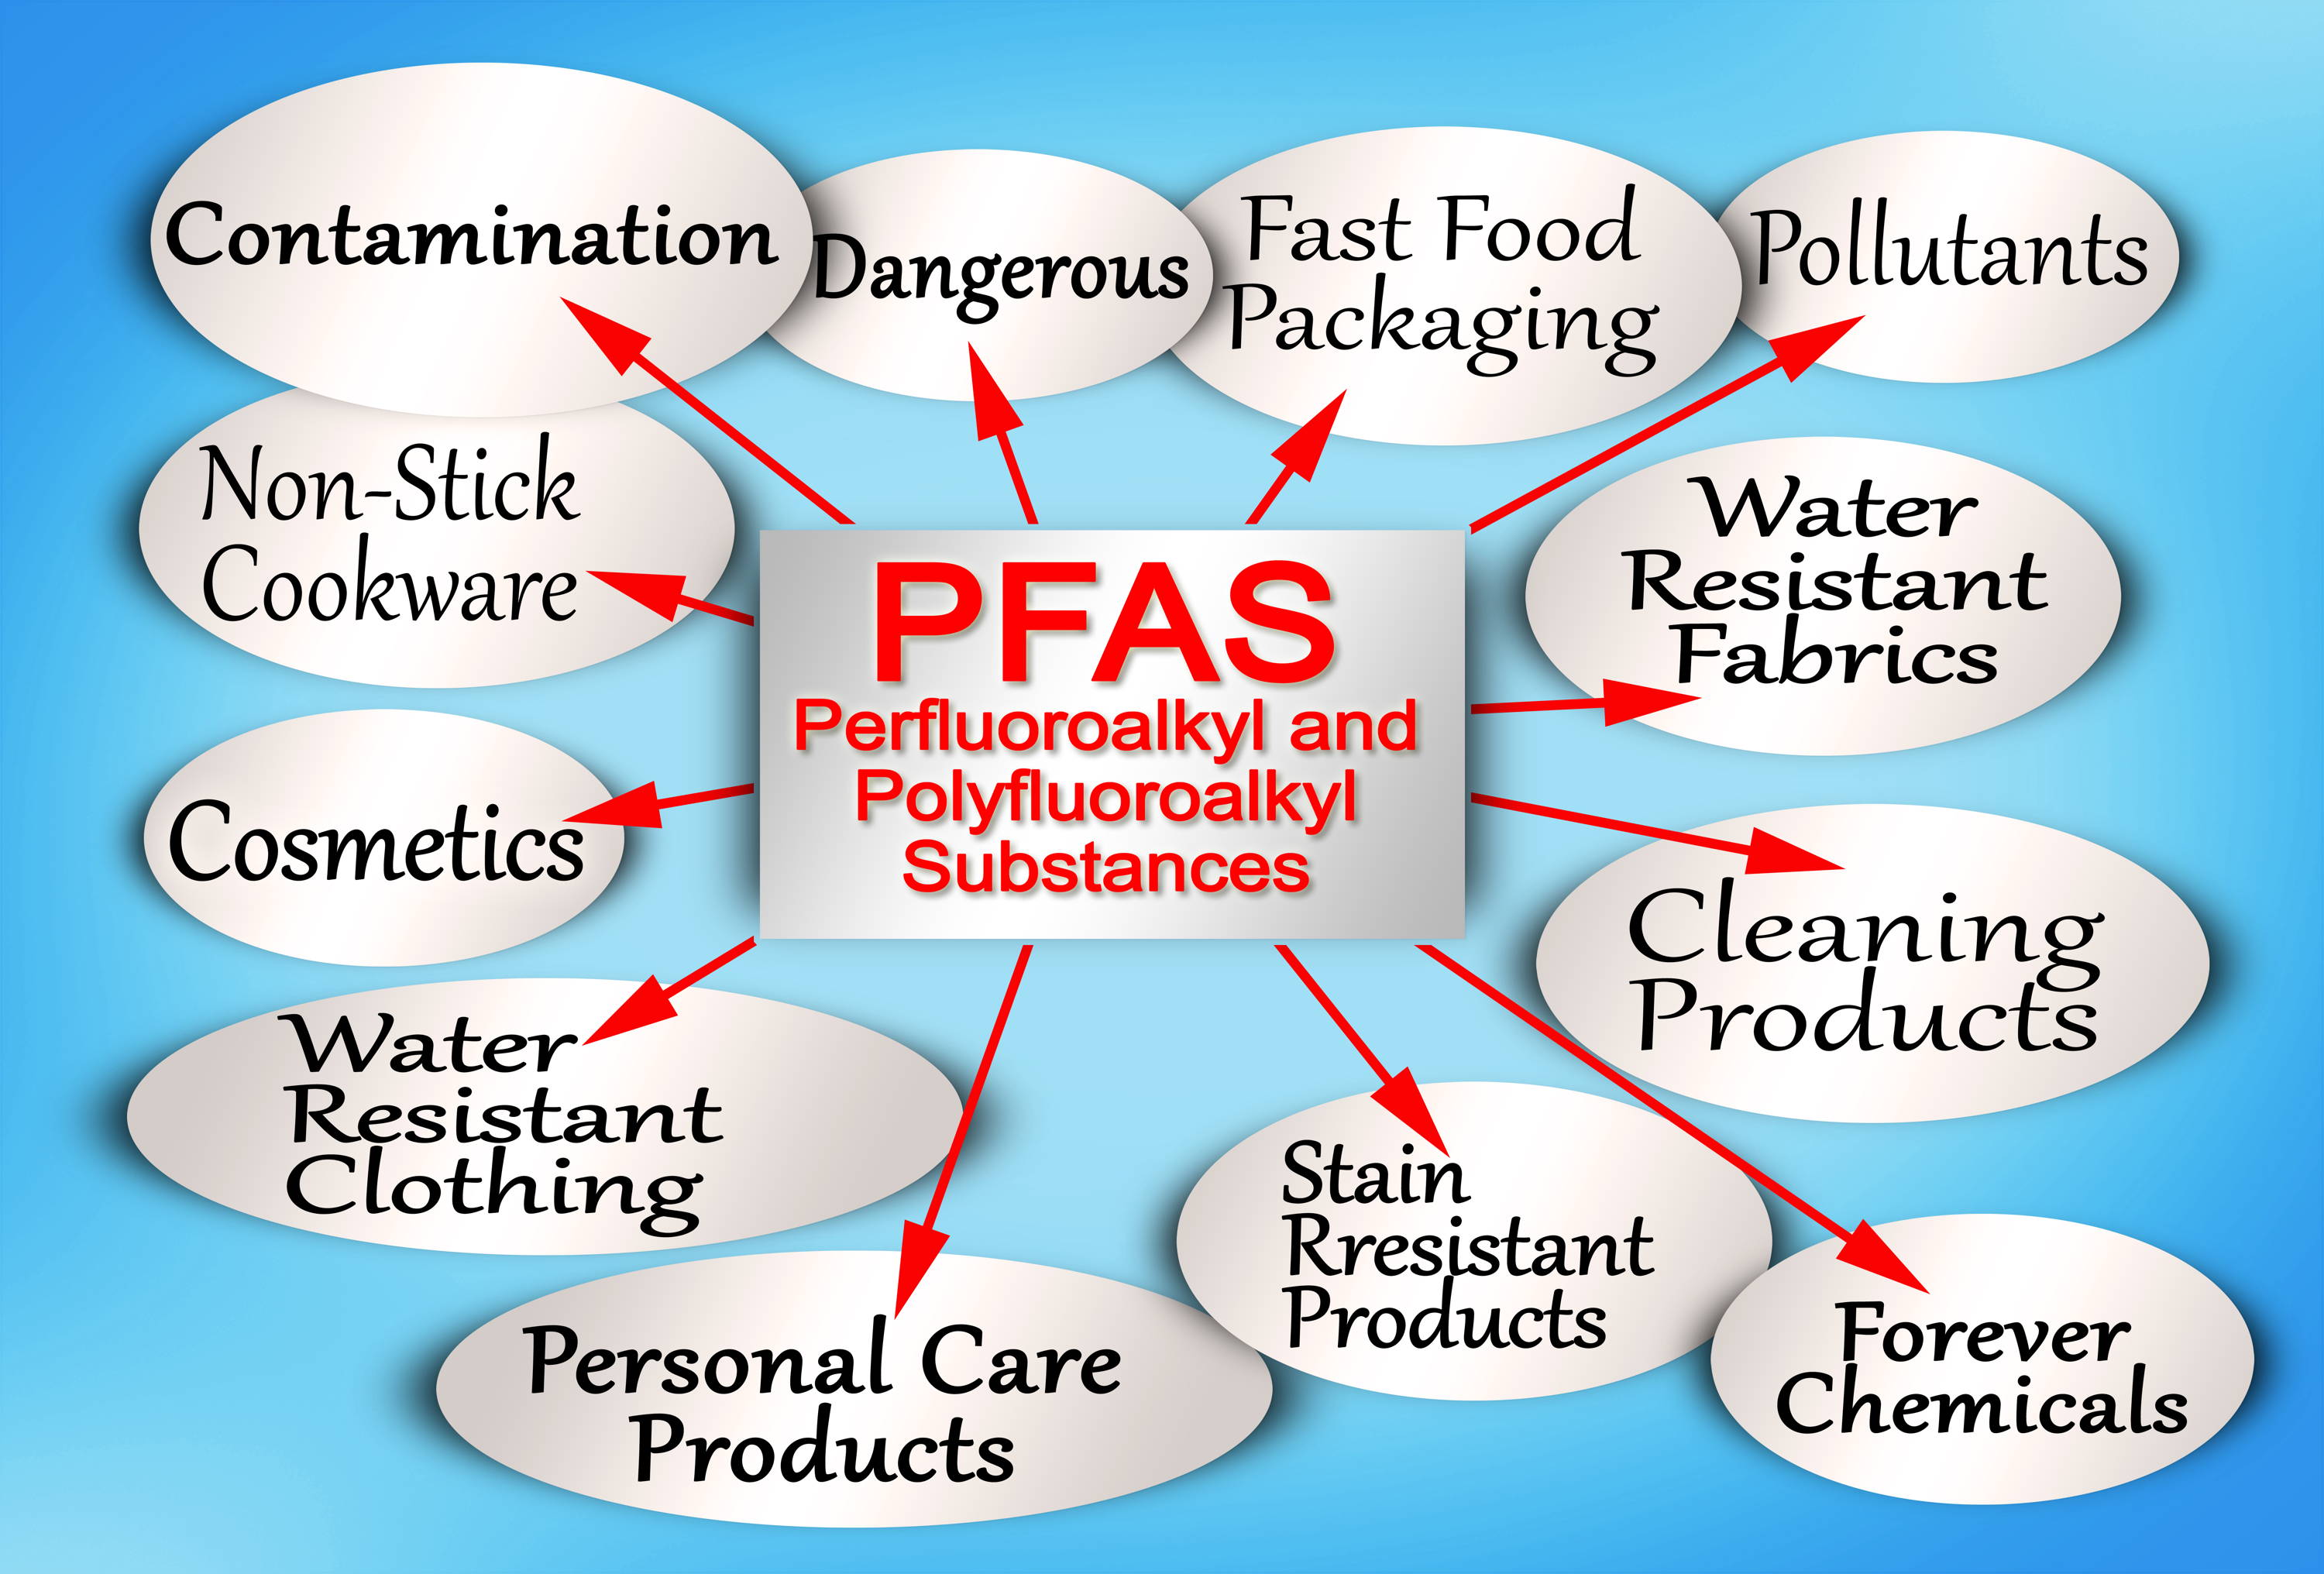 How PFAS have been used in products